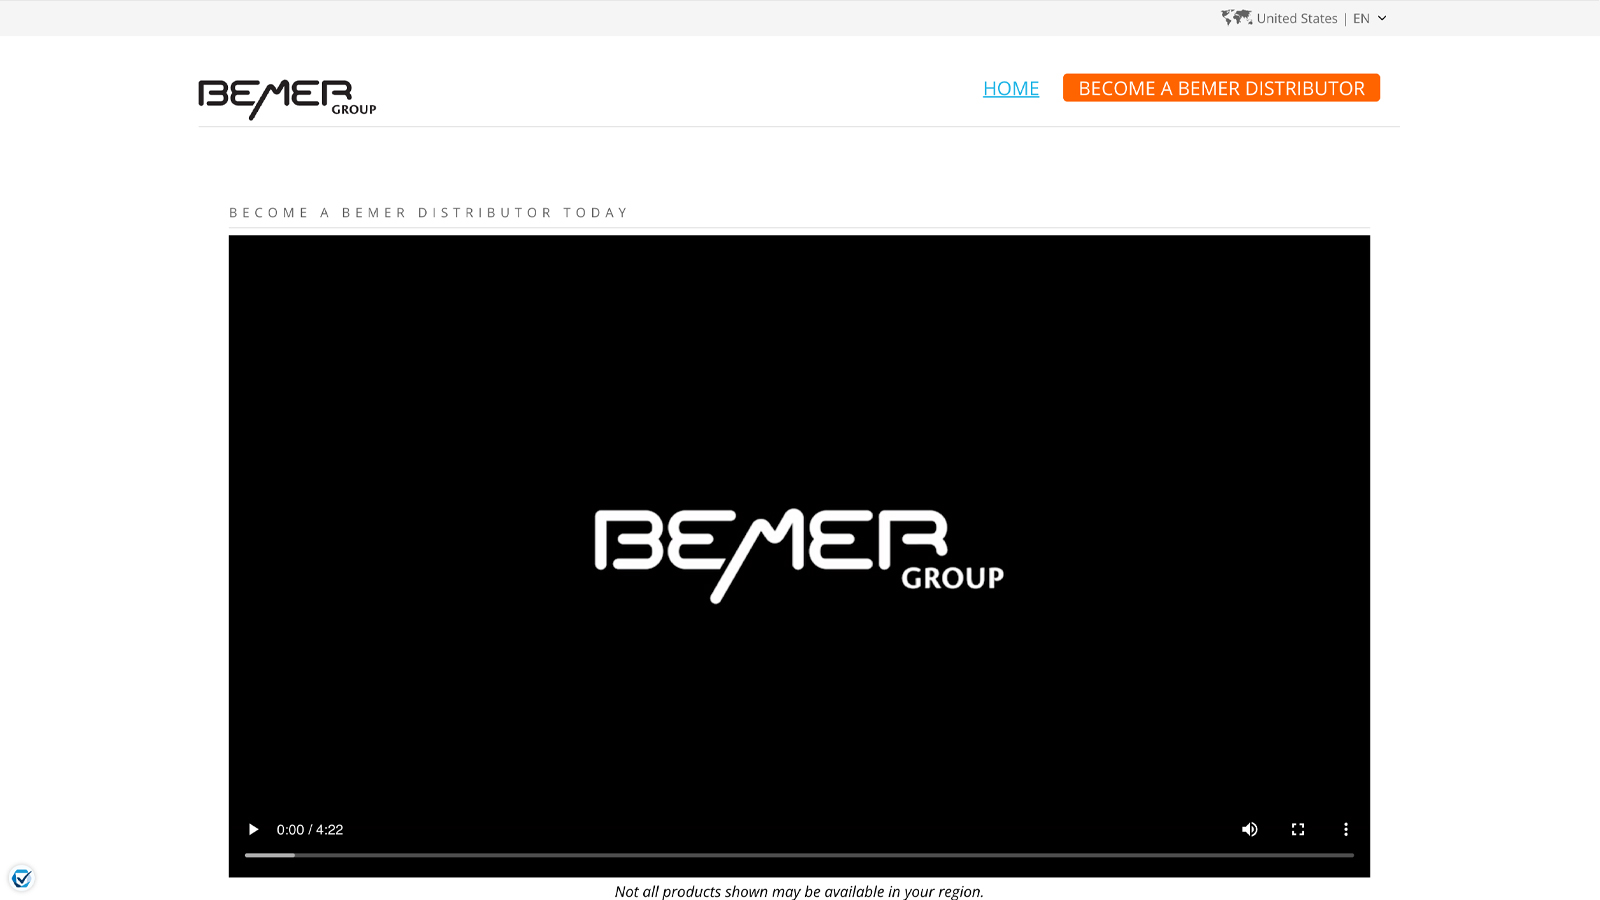 Extensions and revisions of the Bemer AG portals